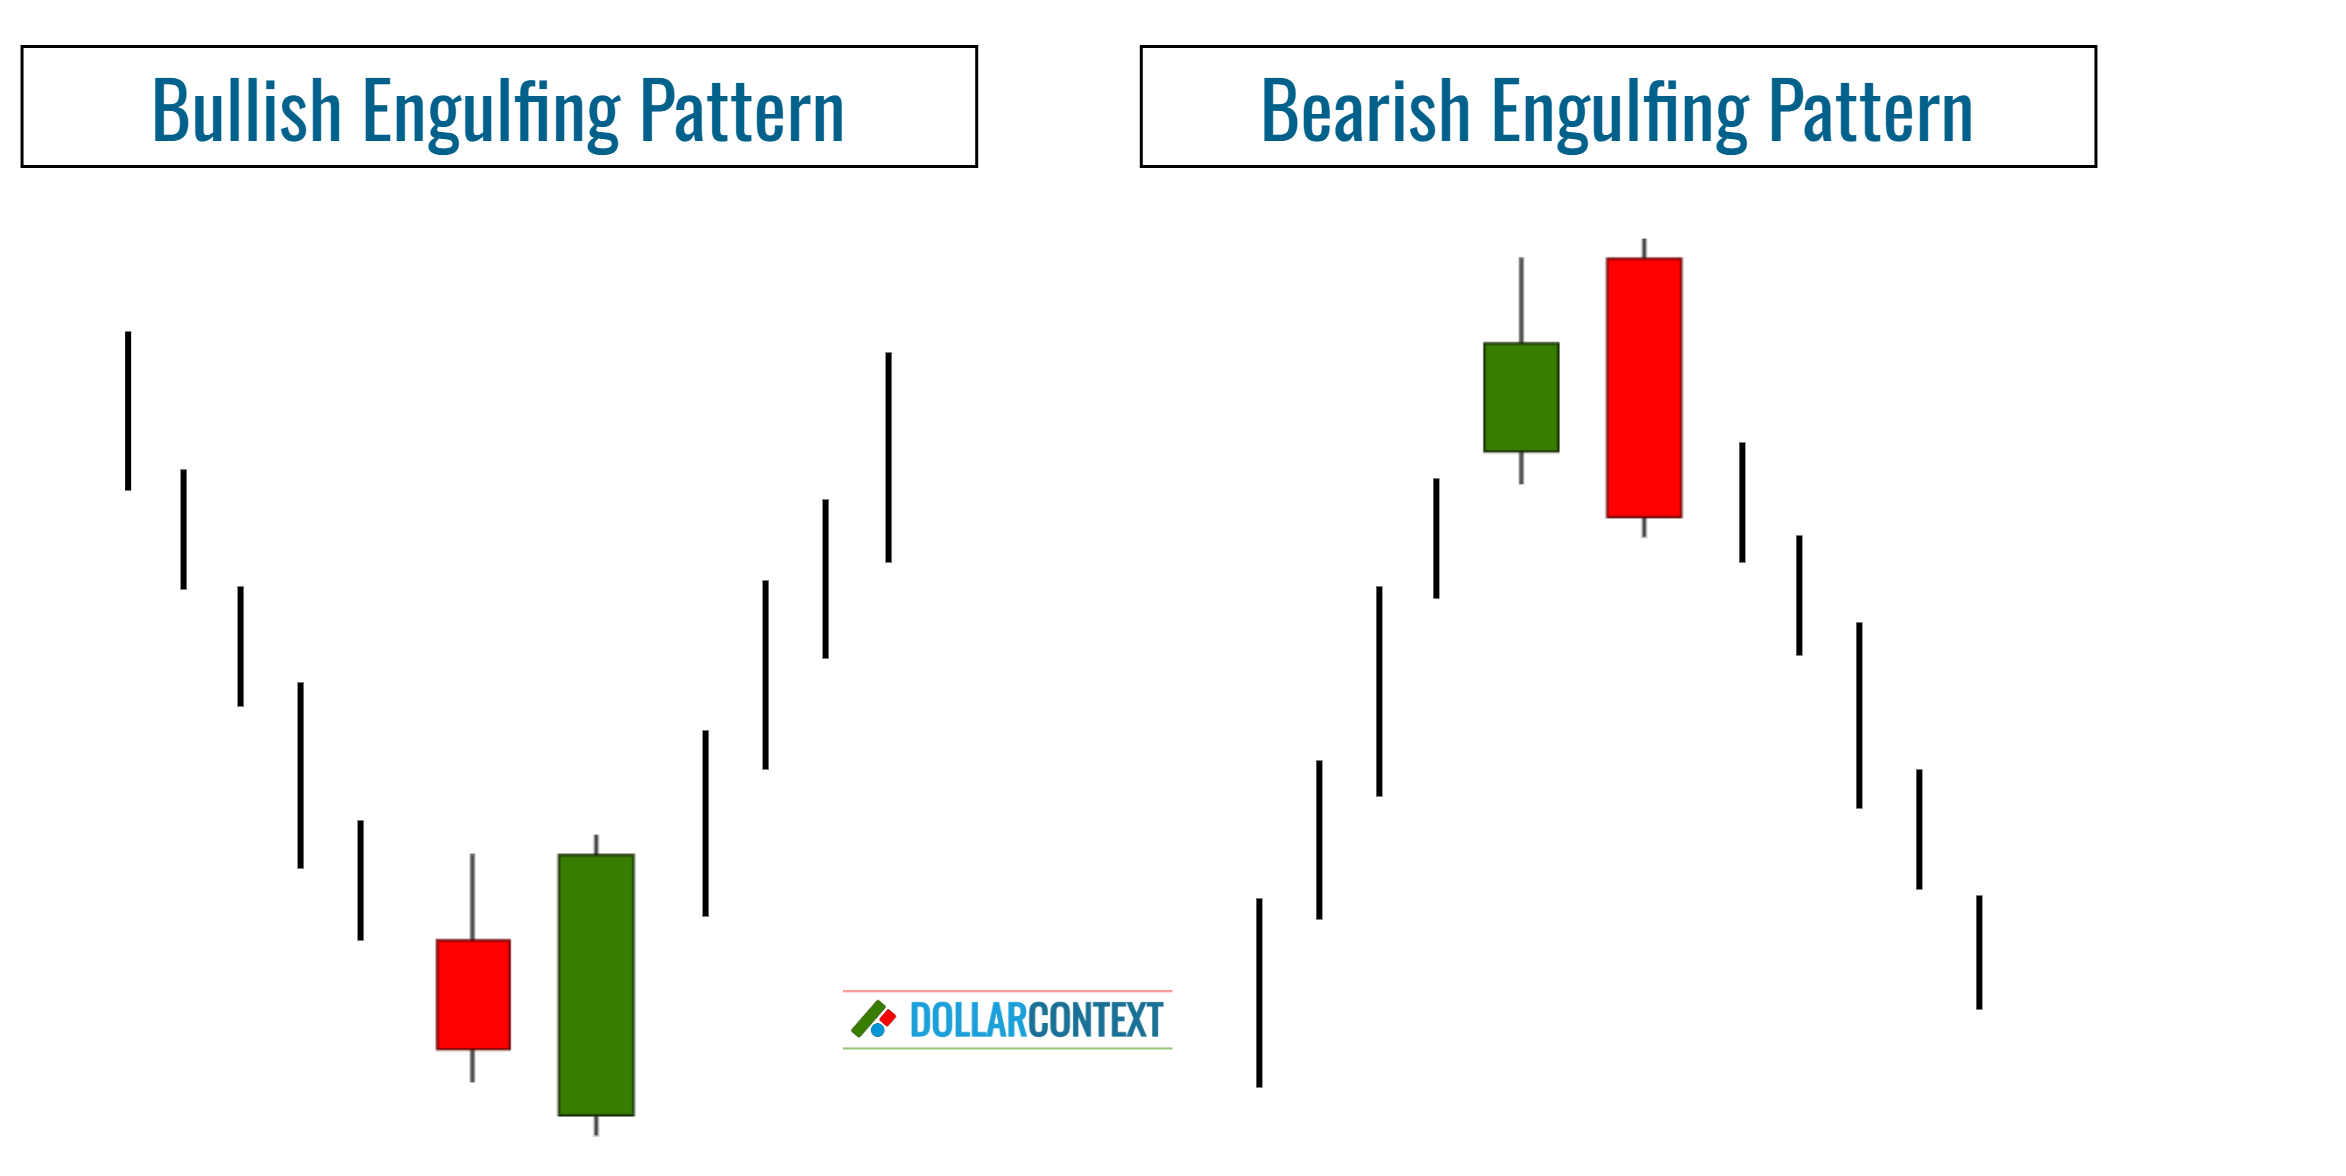 Criteria for an Engulfing Pattern